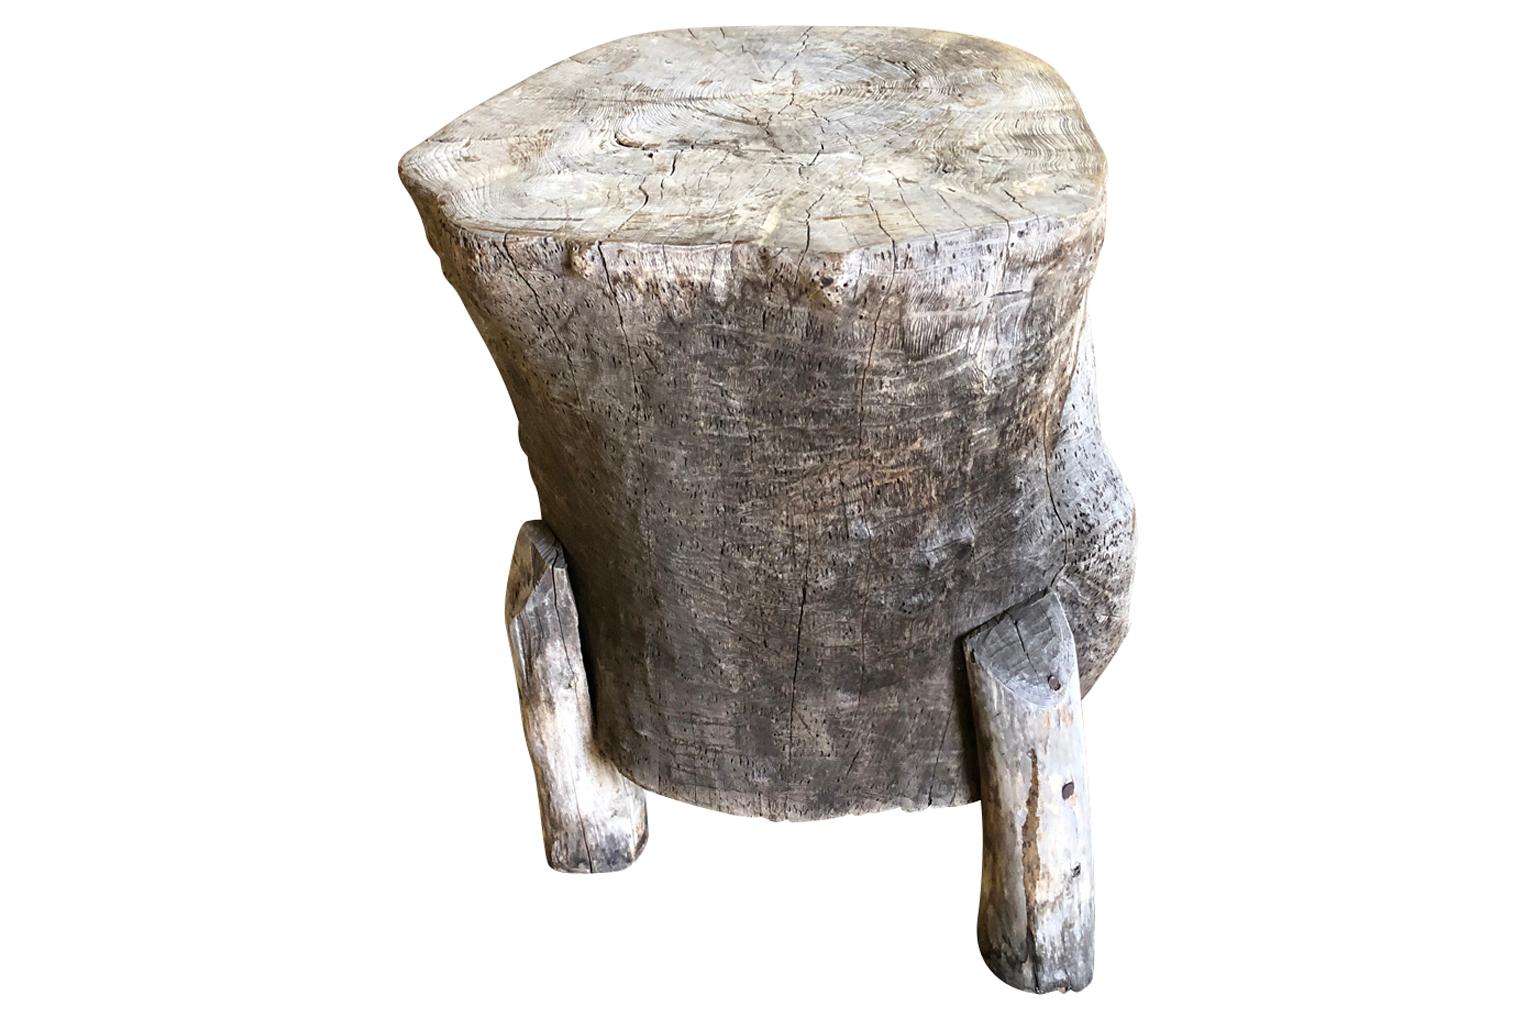 A terrific Primitive 18th century billot, chopping block from the Ardeche region of France. A wonderful end table for any casual interior or exterior living area.